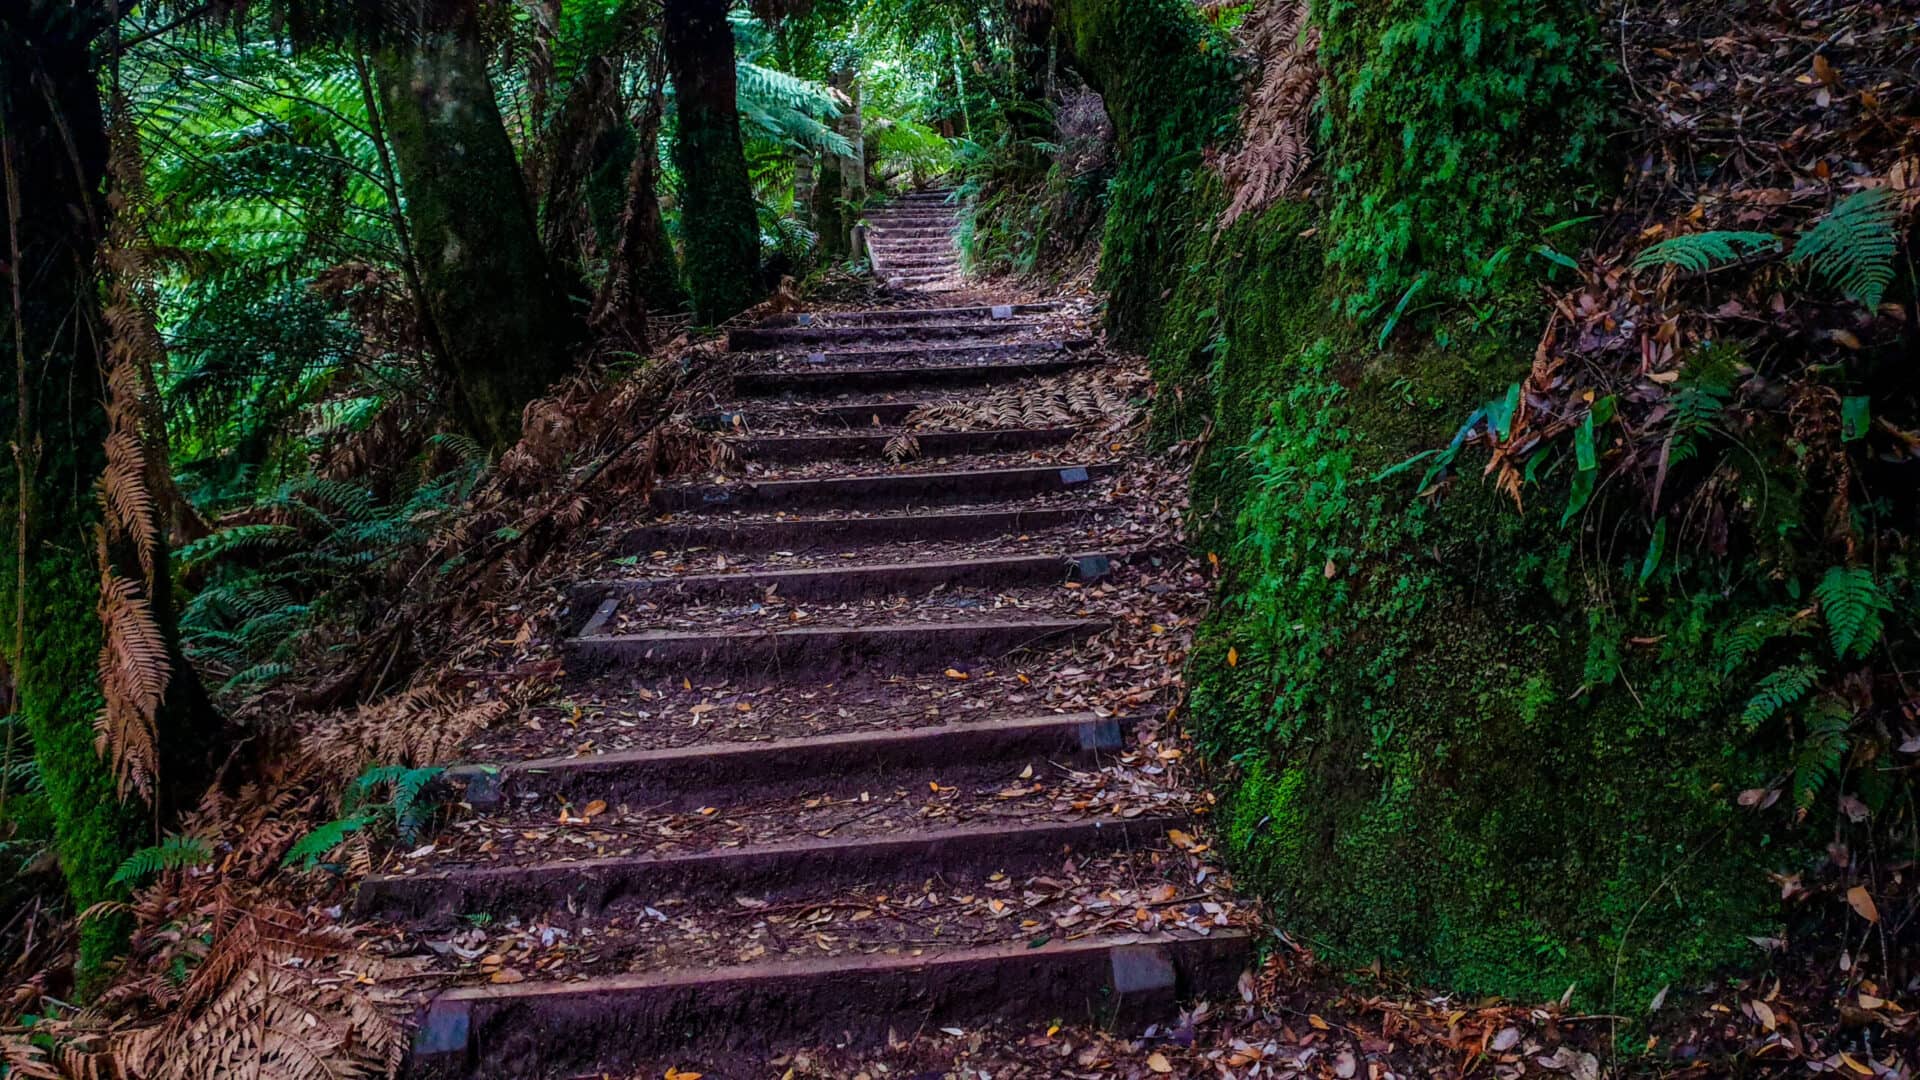 The stairs leading down to liffey falls